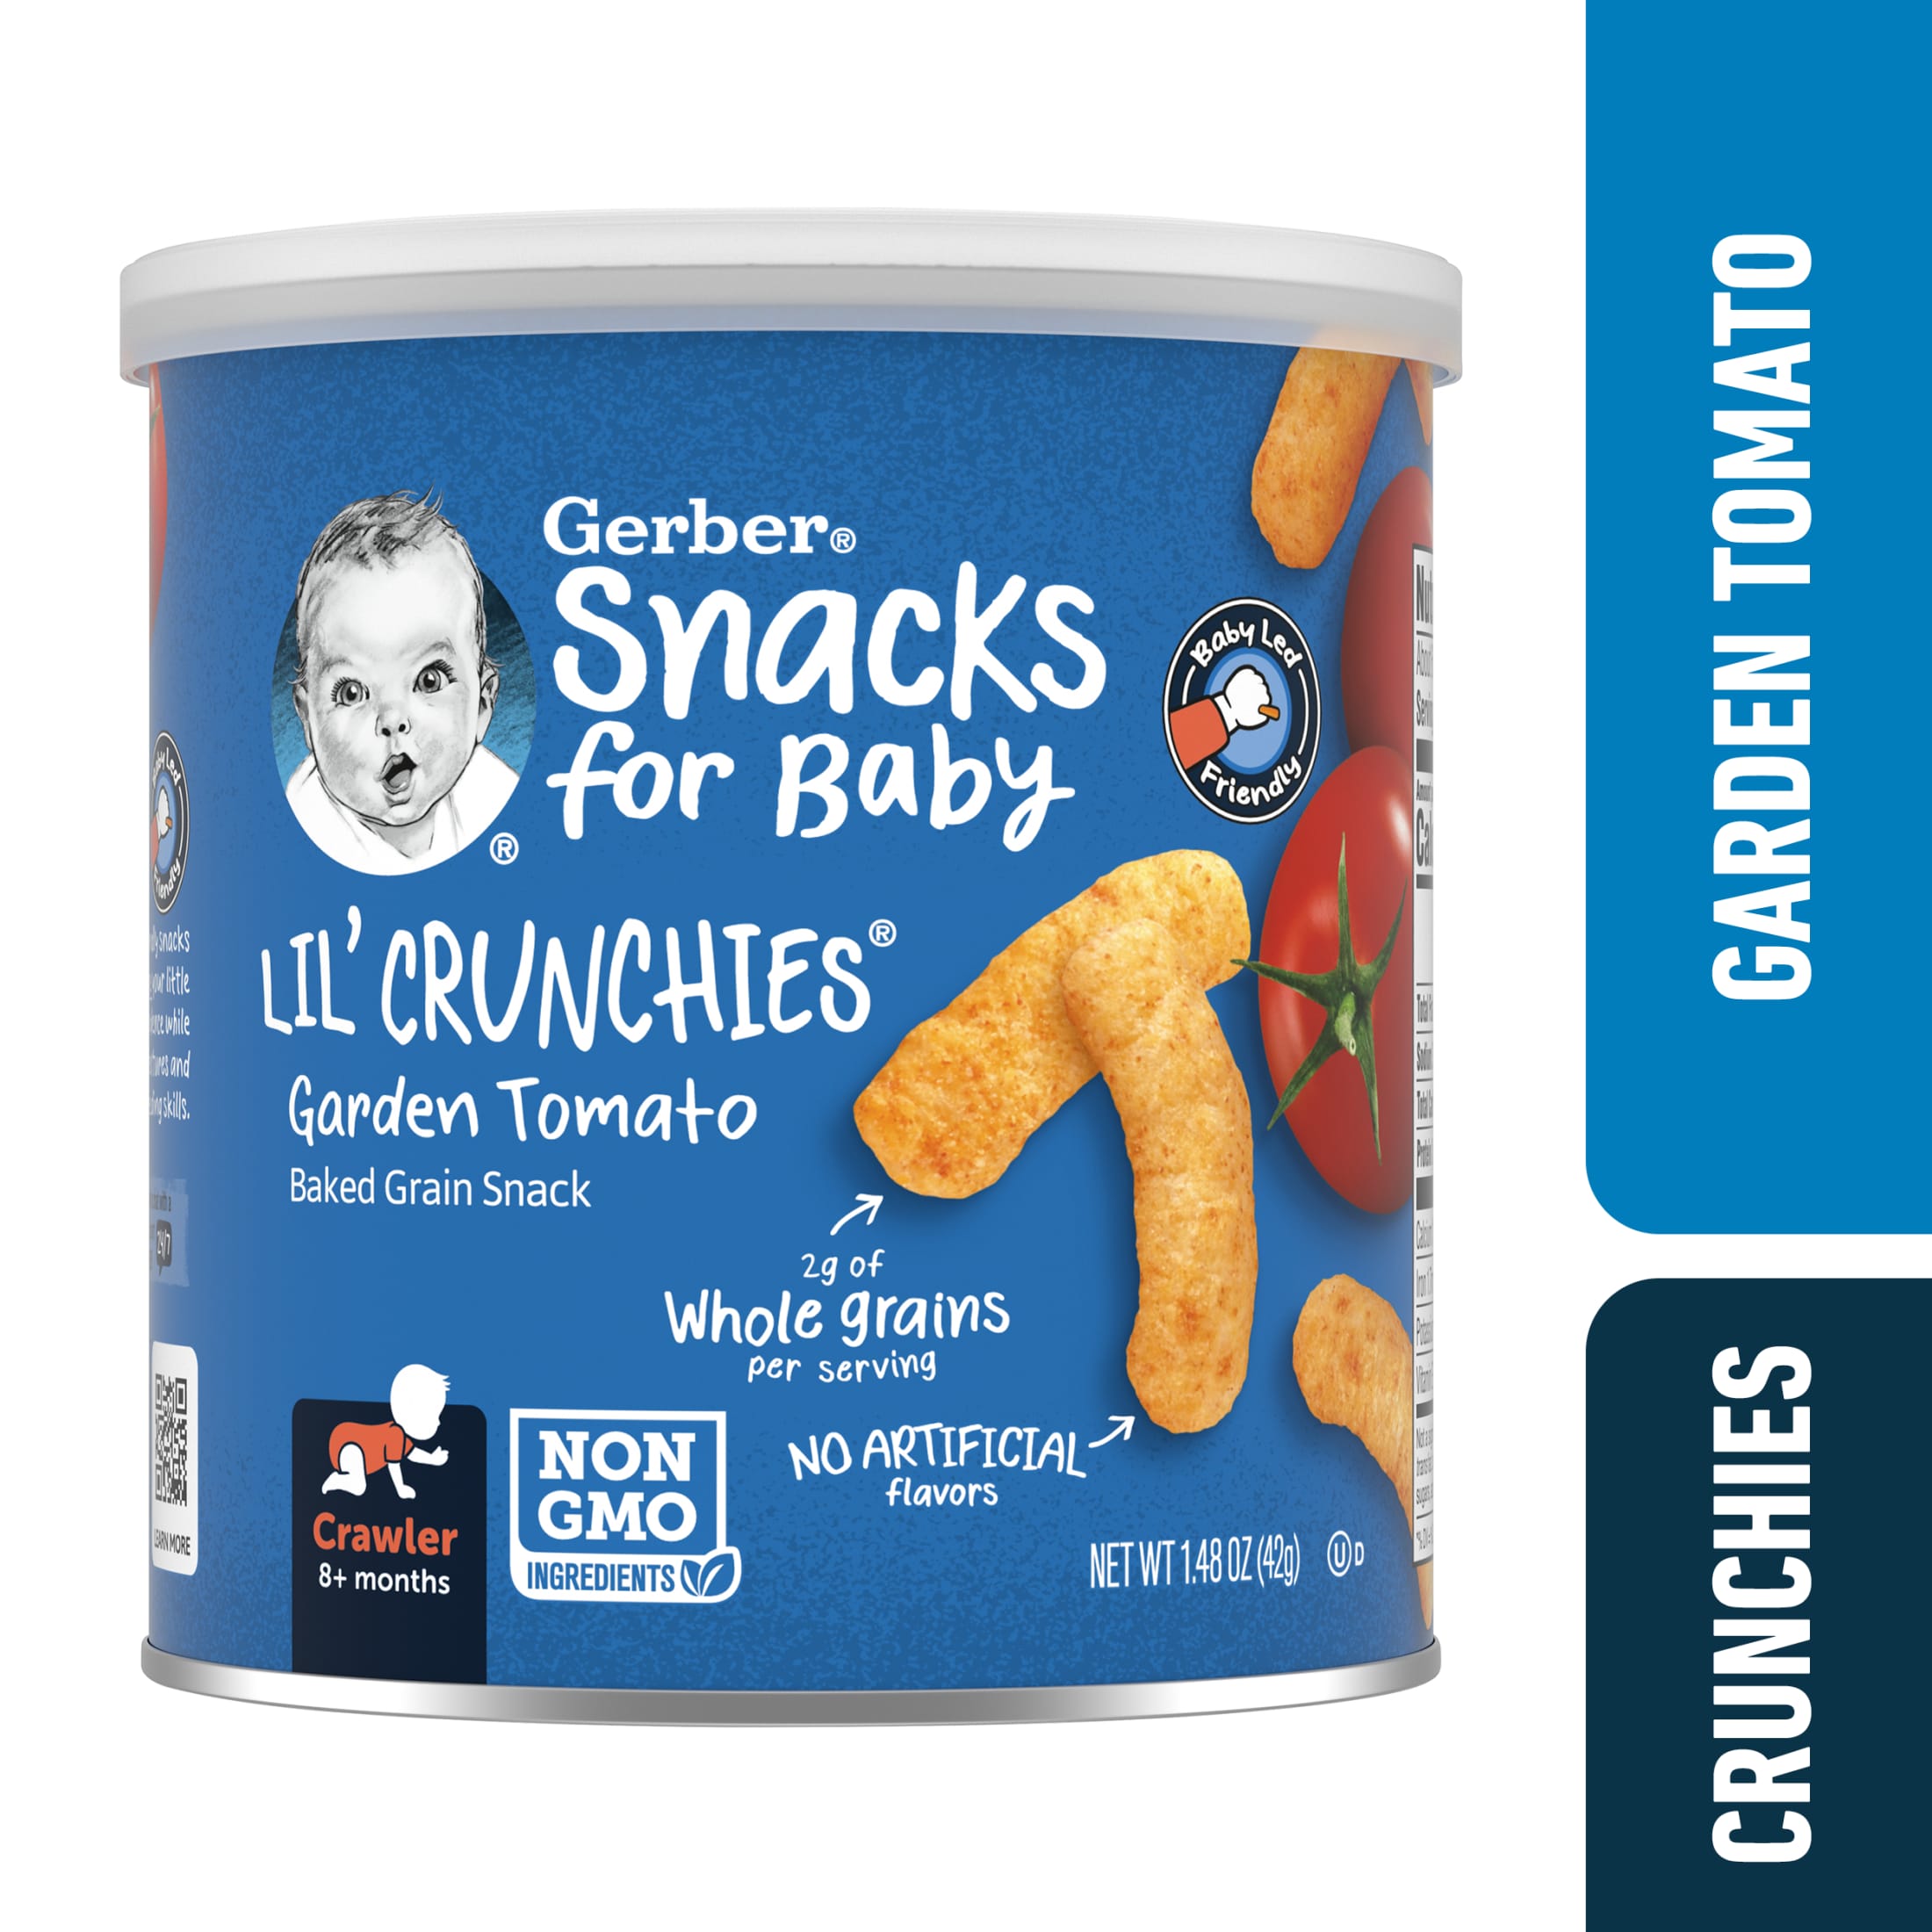 Gerber Snacks for Baby Lil Crunchies Garden Tomato Puffs, 1.48 oz Canister - image 1 of 6